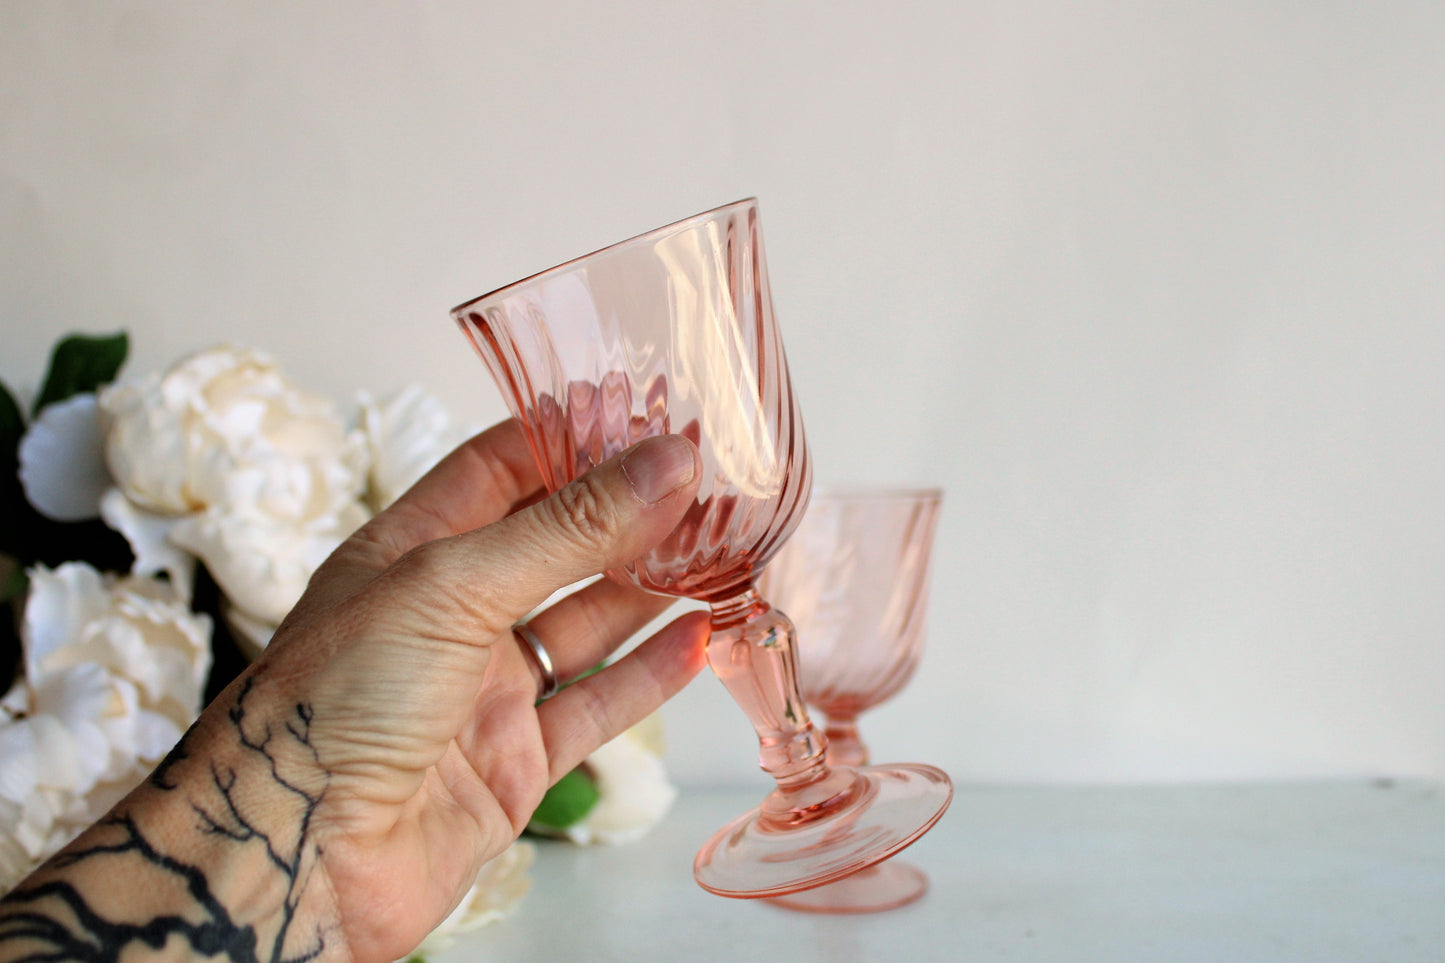 Vintage Port/Sherry Glasses – Manitou Candle Co.